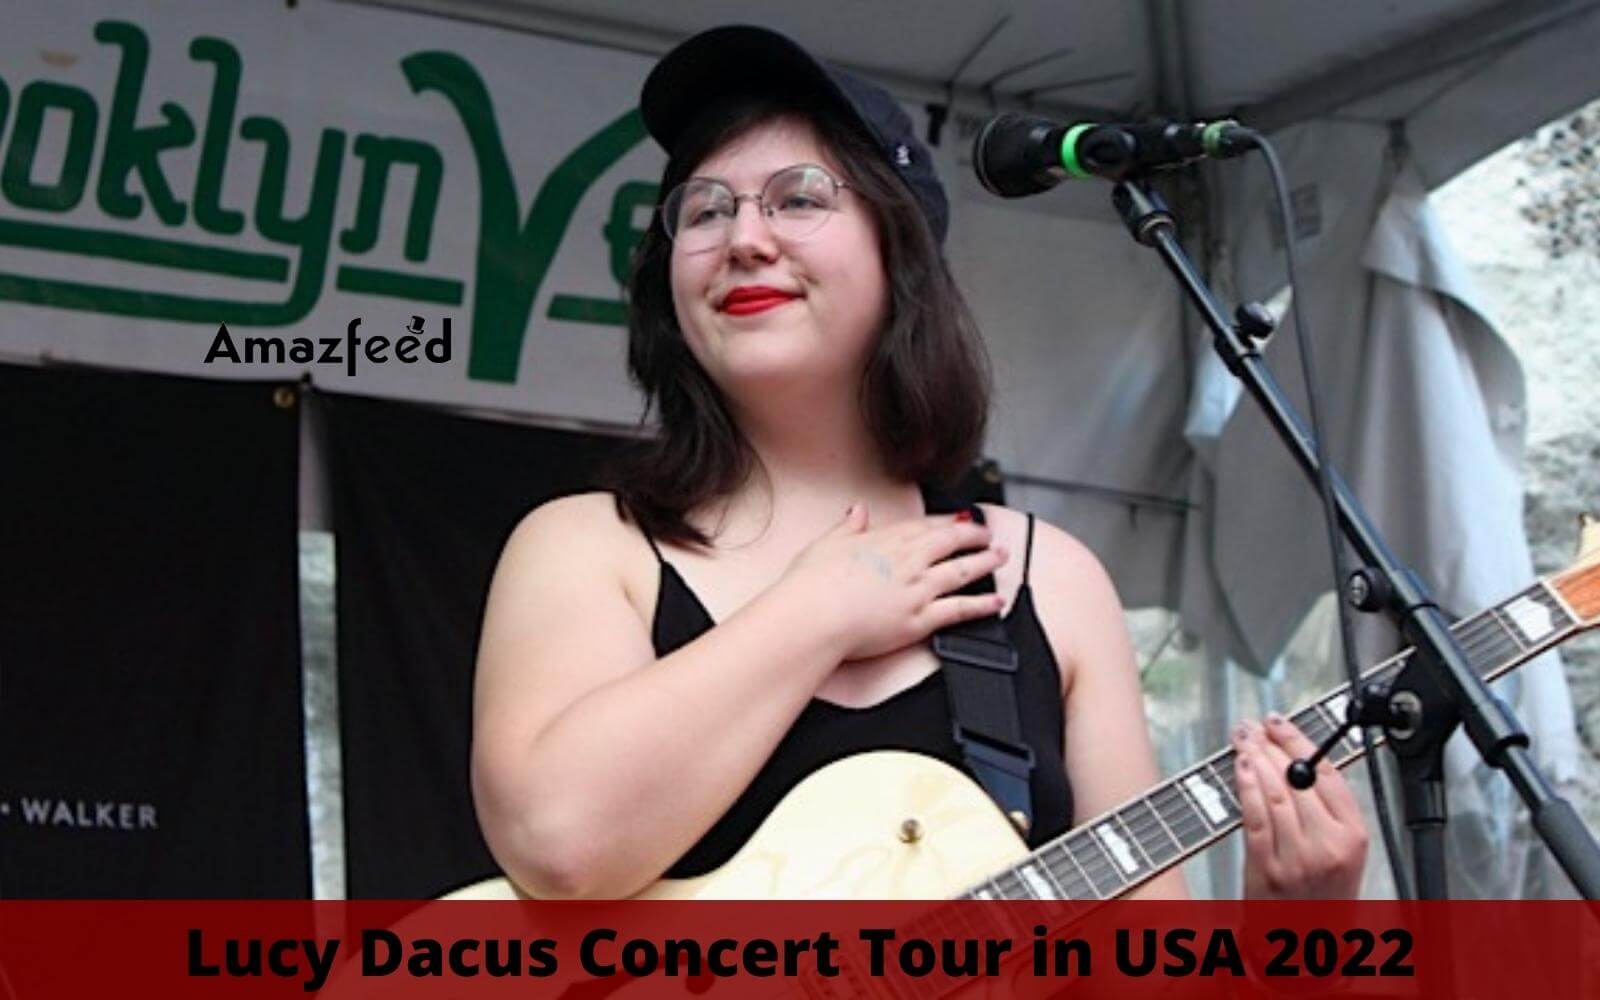 Lucy Dacus Setlist 2022, Concert Tour Dates in 2022 | US & Europe | Set List, Band Members